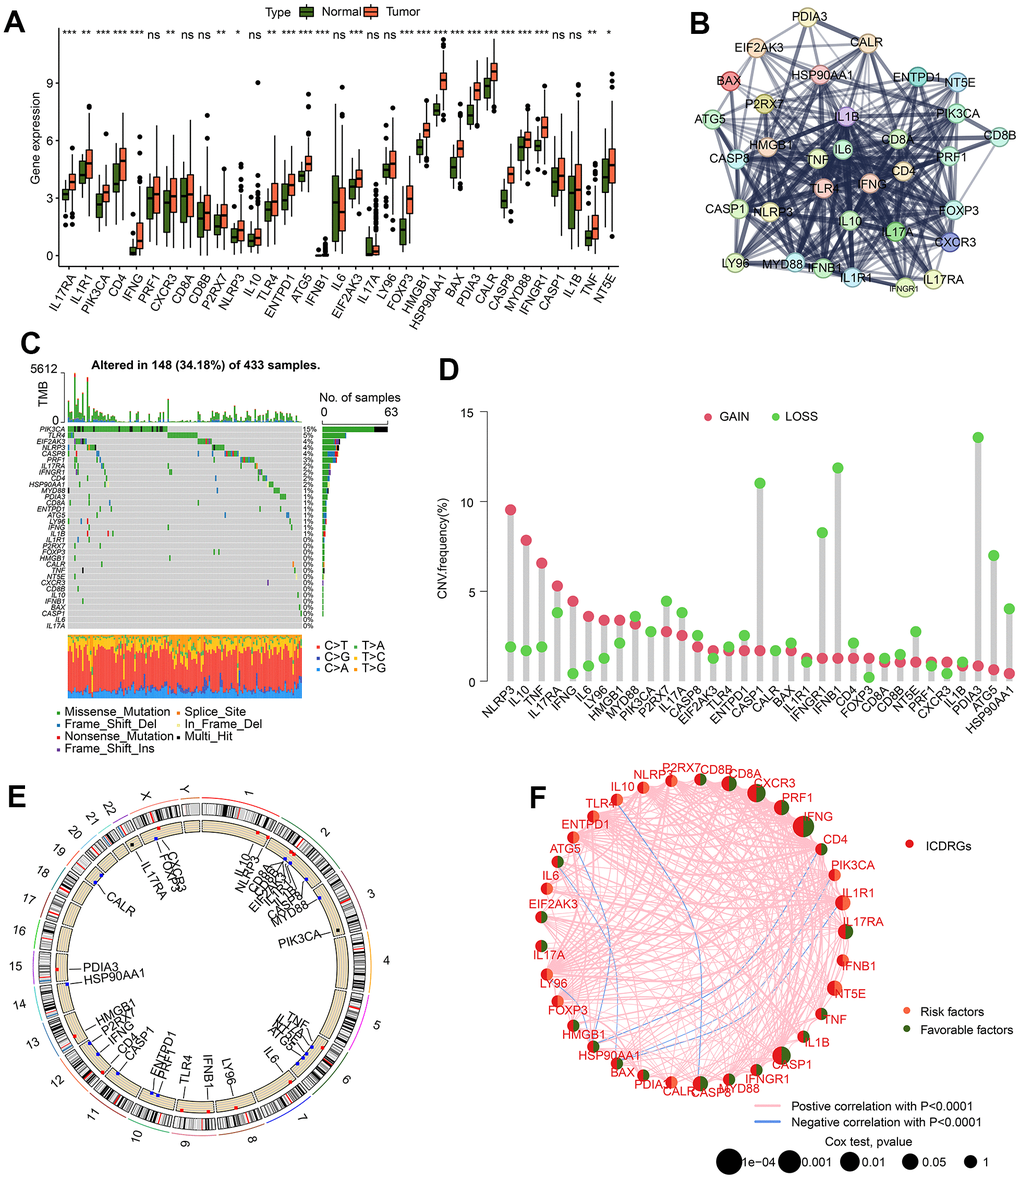 The potential feature of ICDRGs in GC. (A) Difference analysis of 33 ICDRGs in normal and GC tissues. (B) Interaction evaluation of 33 ICDRGs. (C) Mutation landscape of ICDRGs. (D) CNV estimation of ICDRGs in GC. (E) Circle diagram reveals the location of ICDRGs on chromosome. (F) Prognostic value and correlation analysis of ICDRGs.